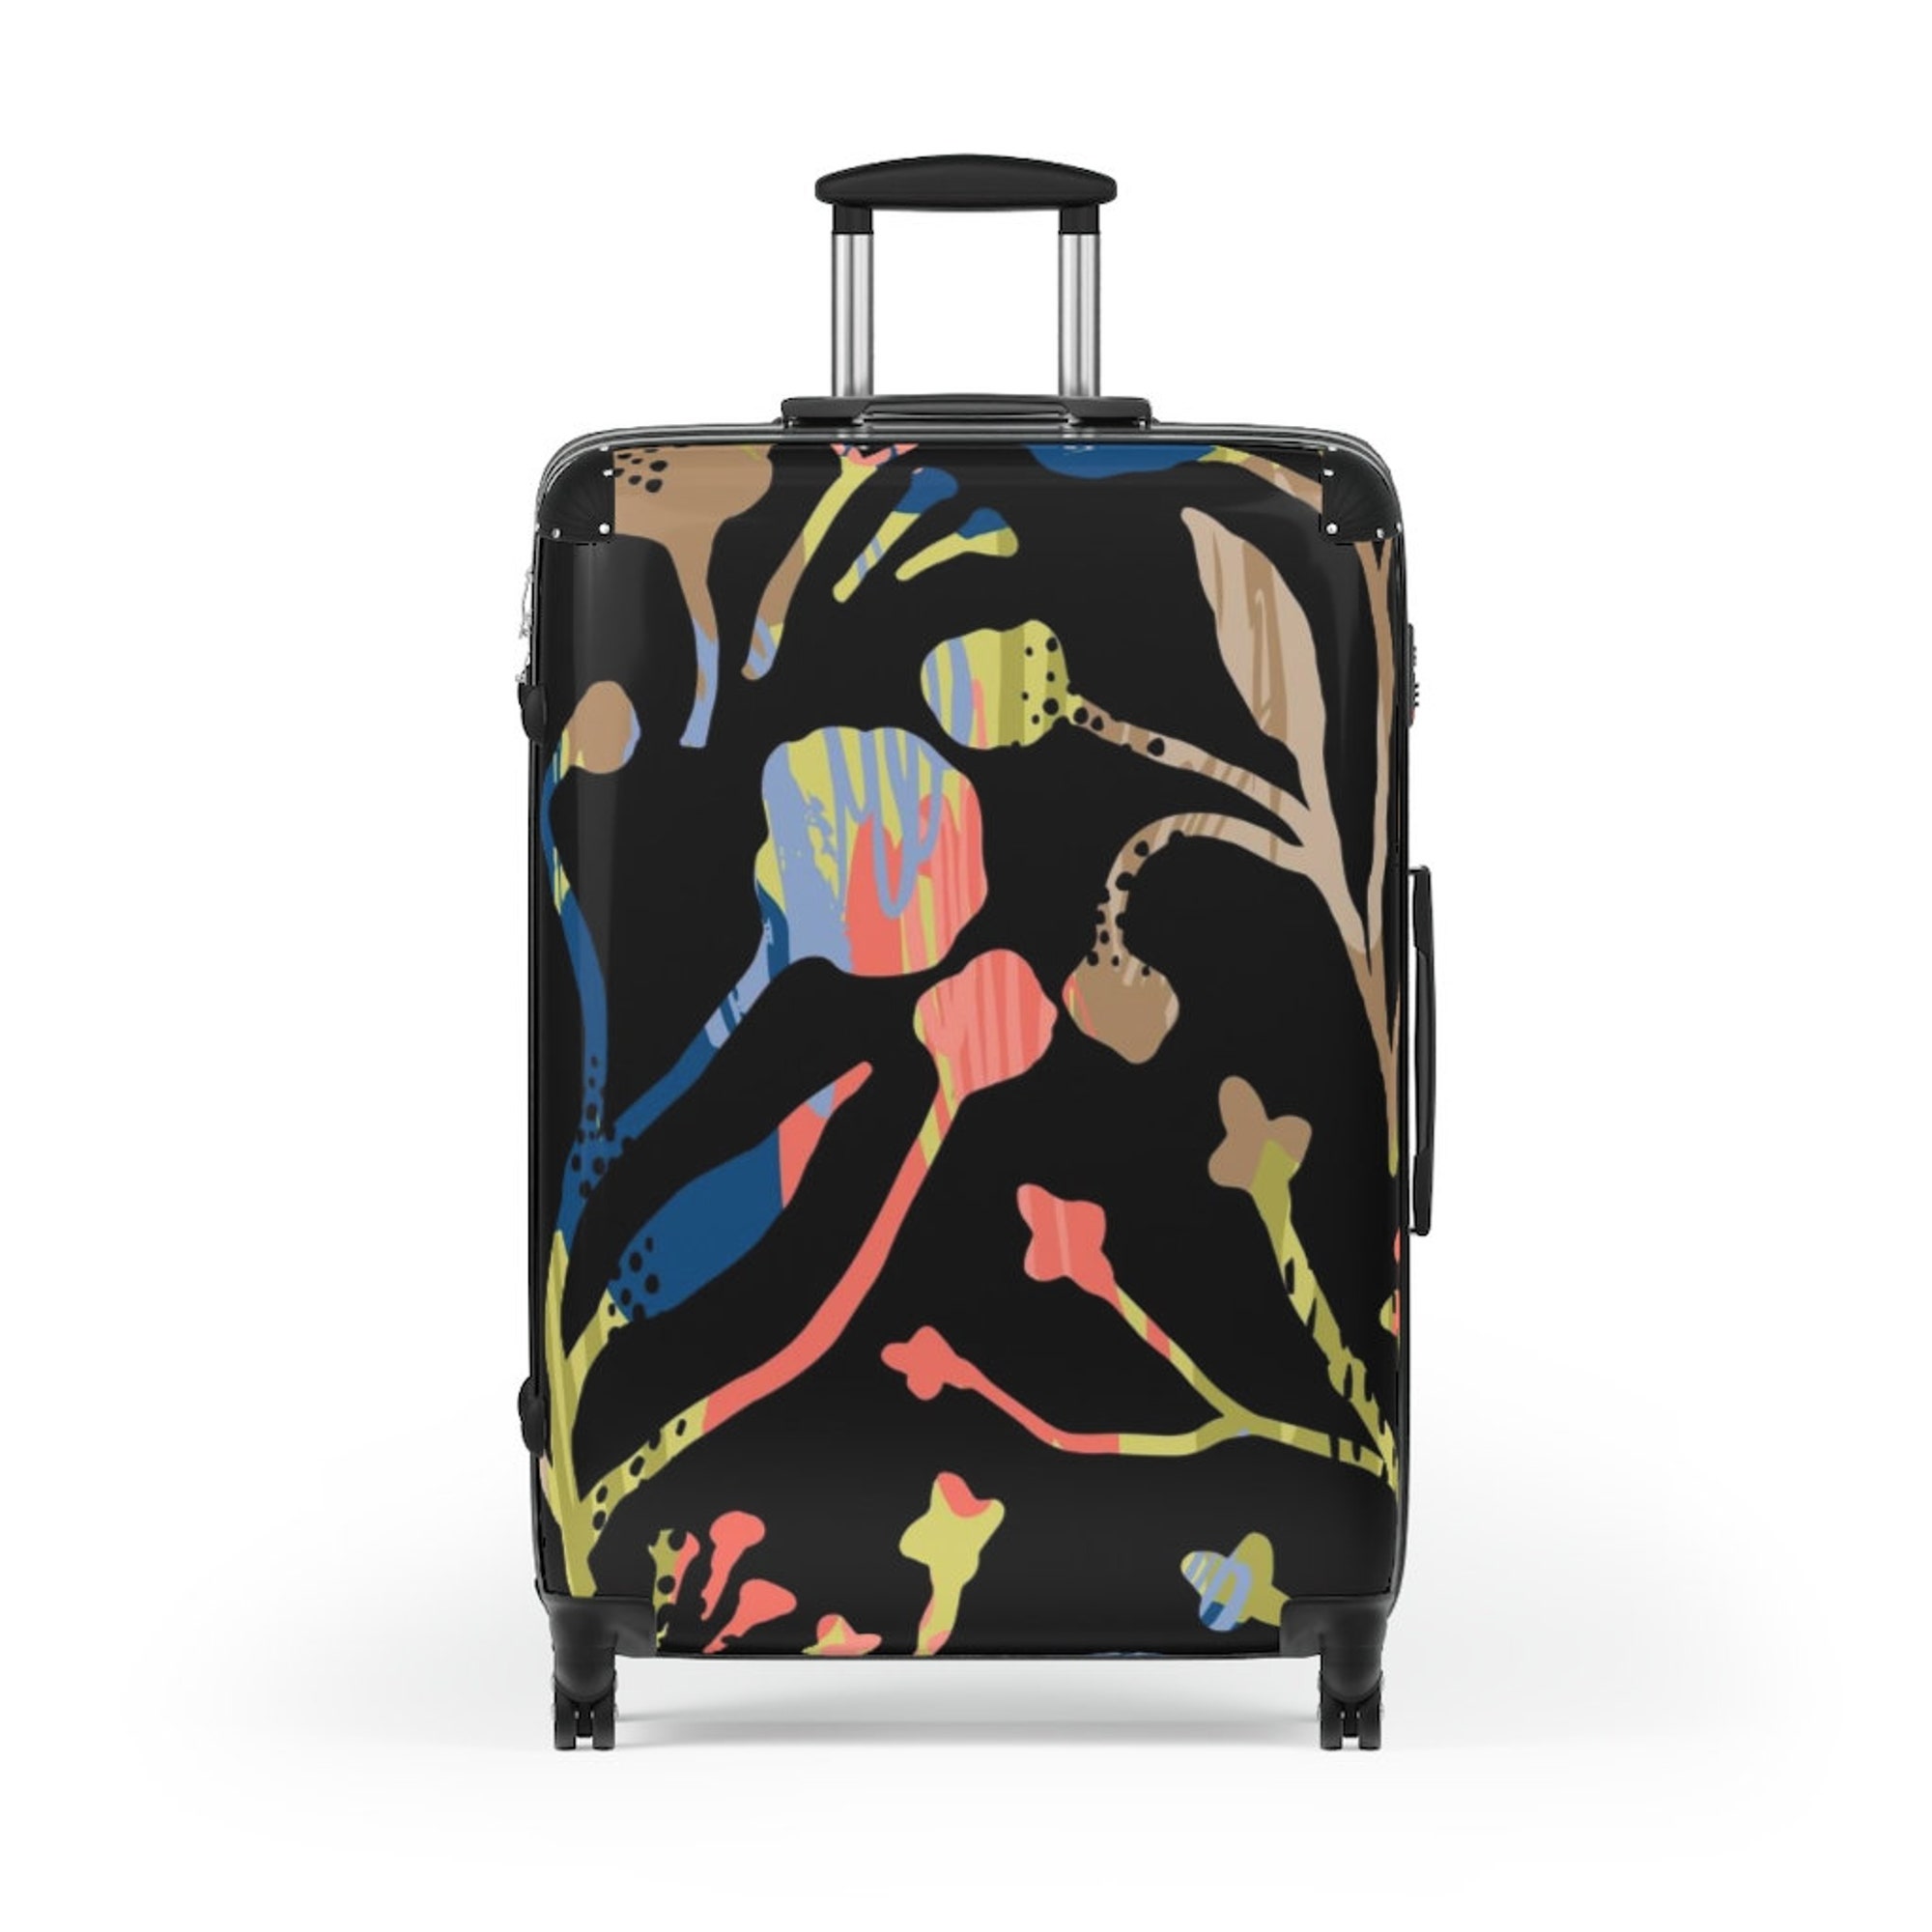 Discover The Payton Suitcase